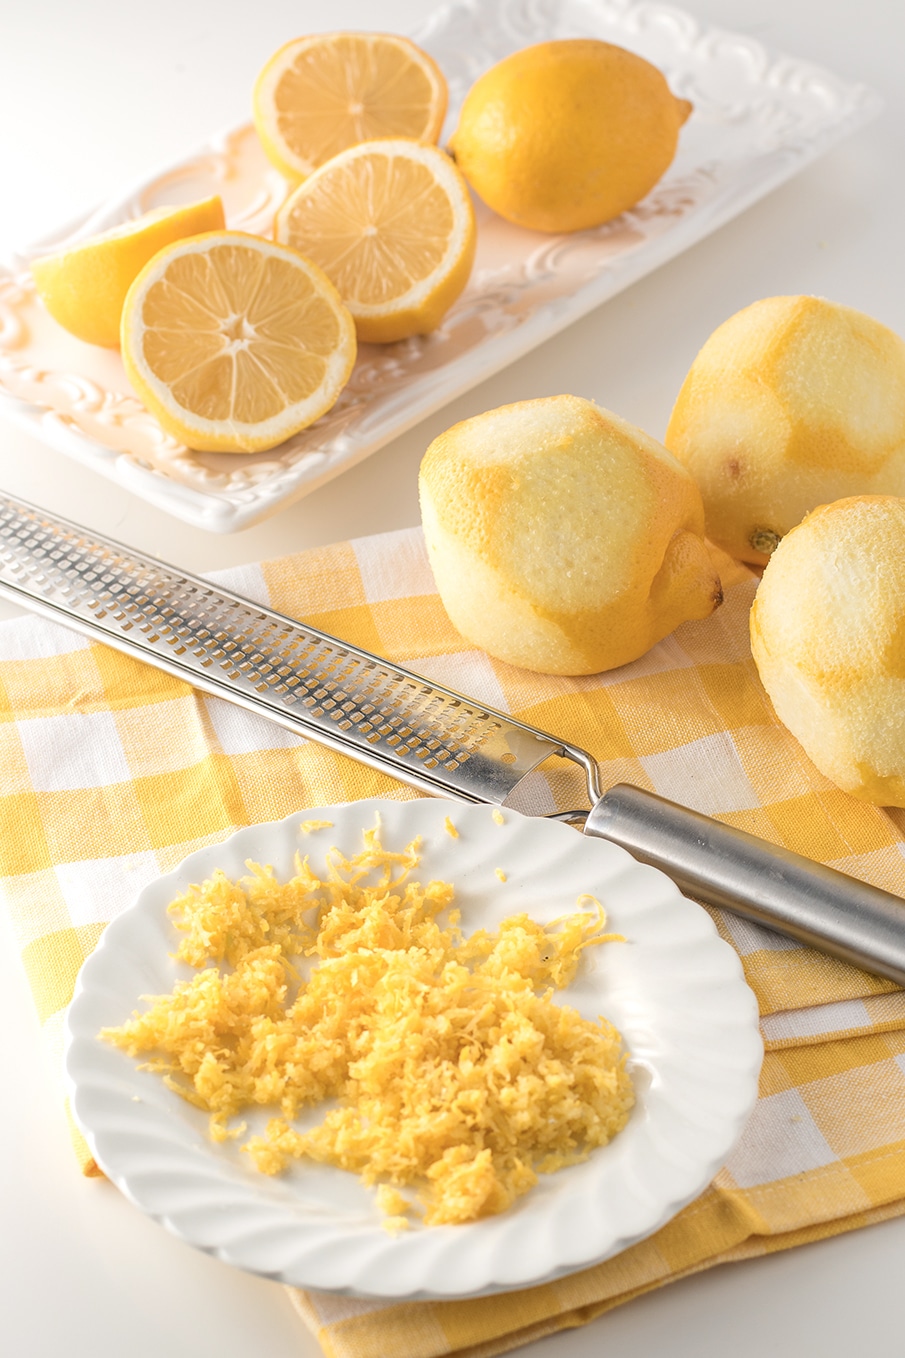 a plate of lemon zest, a long metal zester, with sliced and zested lemons on a white background